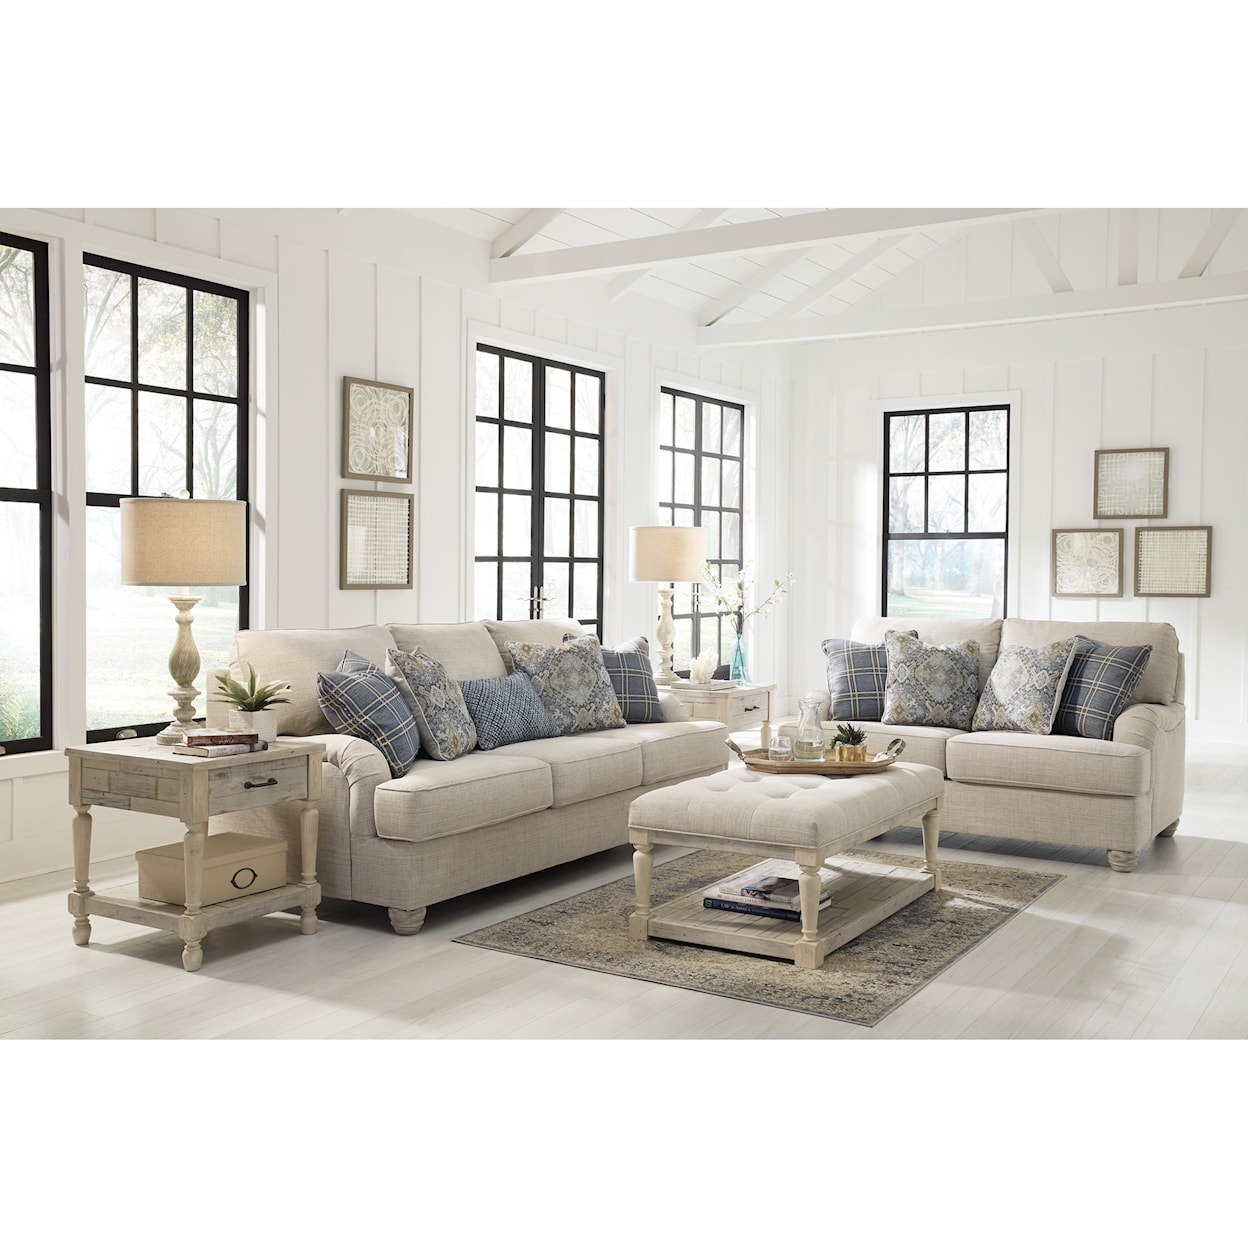 Ashley Furniture Benchcraft Traemore 2-Piece Living Room Group